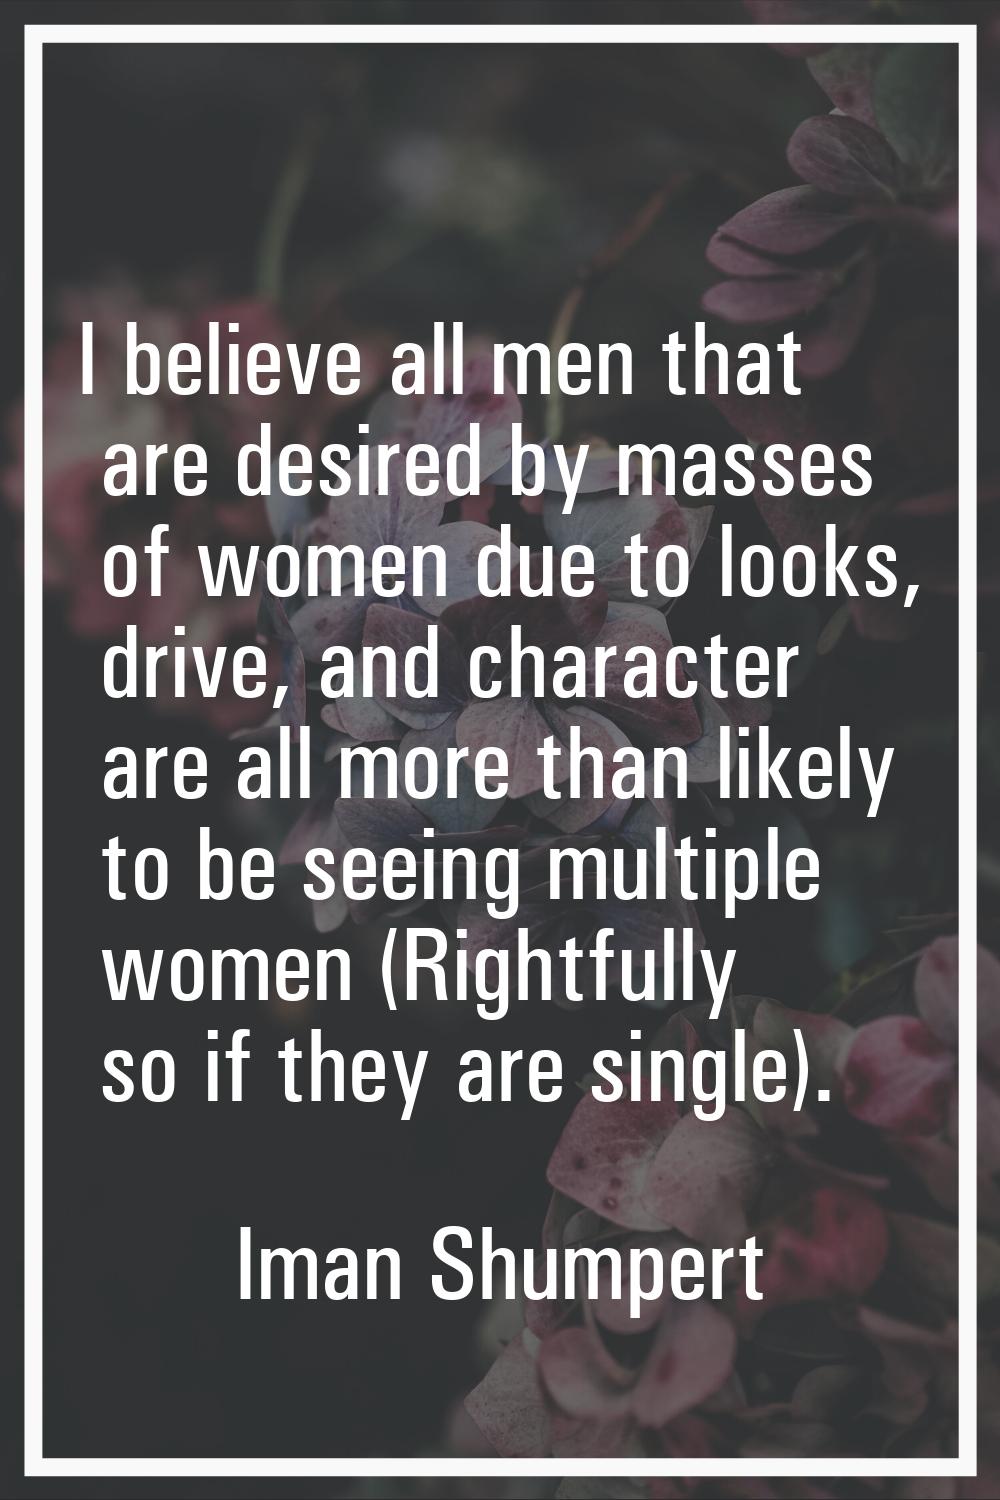 I believe all men that are desired by masses of women due to looks, drive, and character are all mo